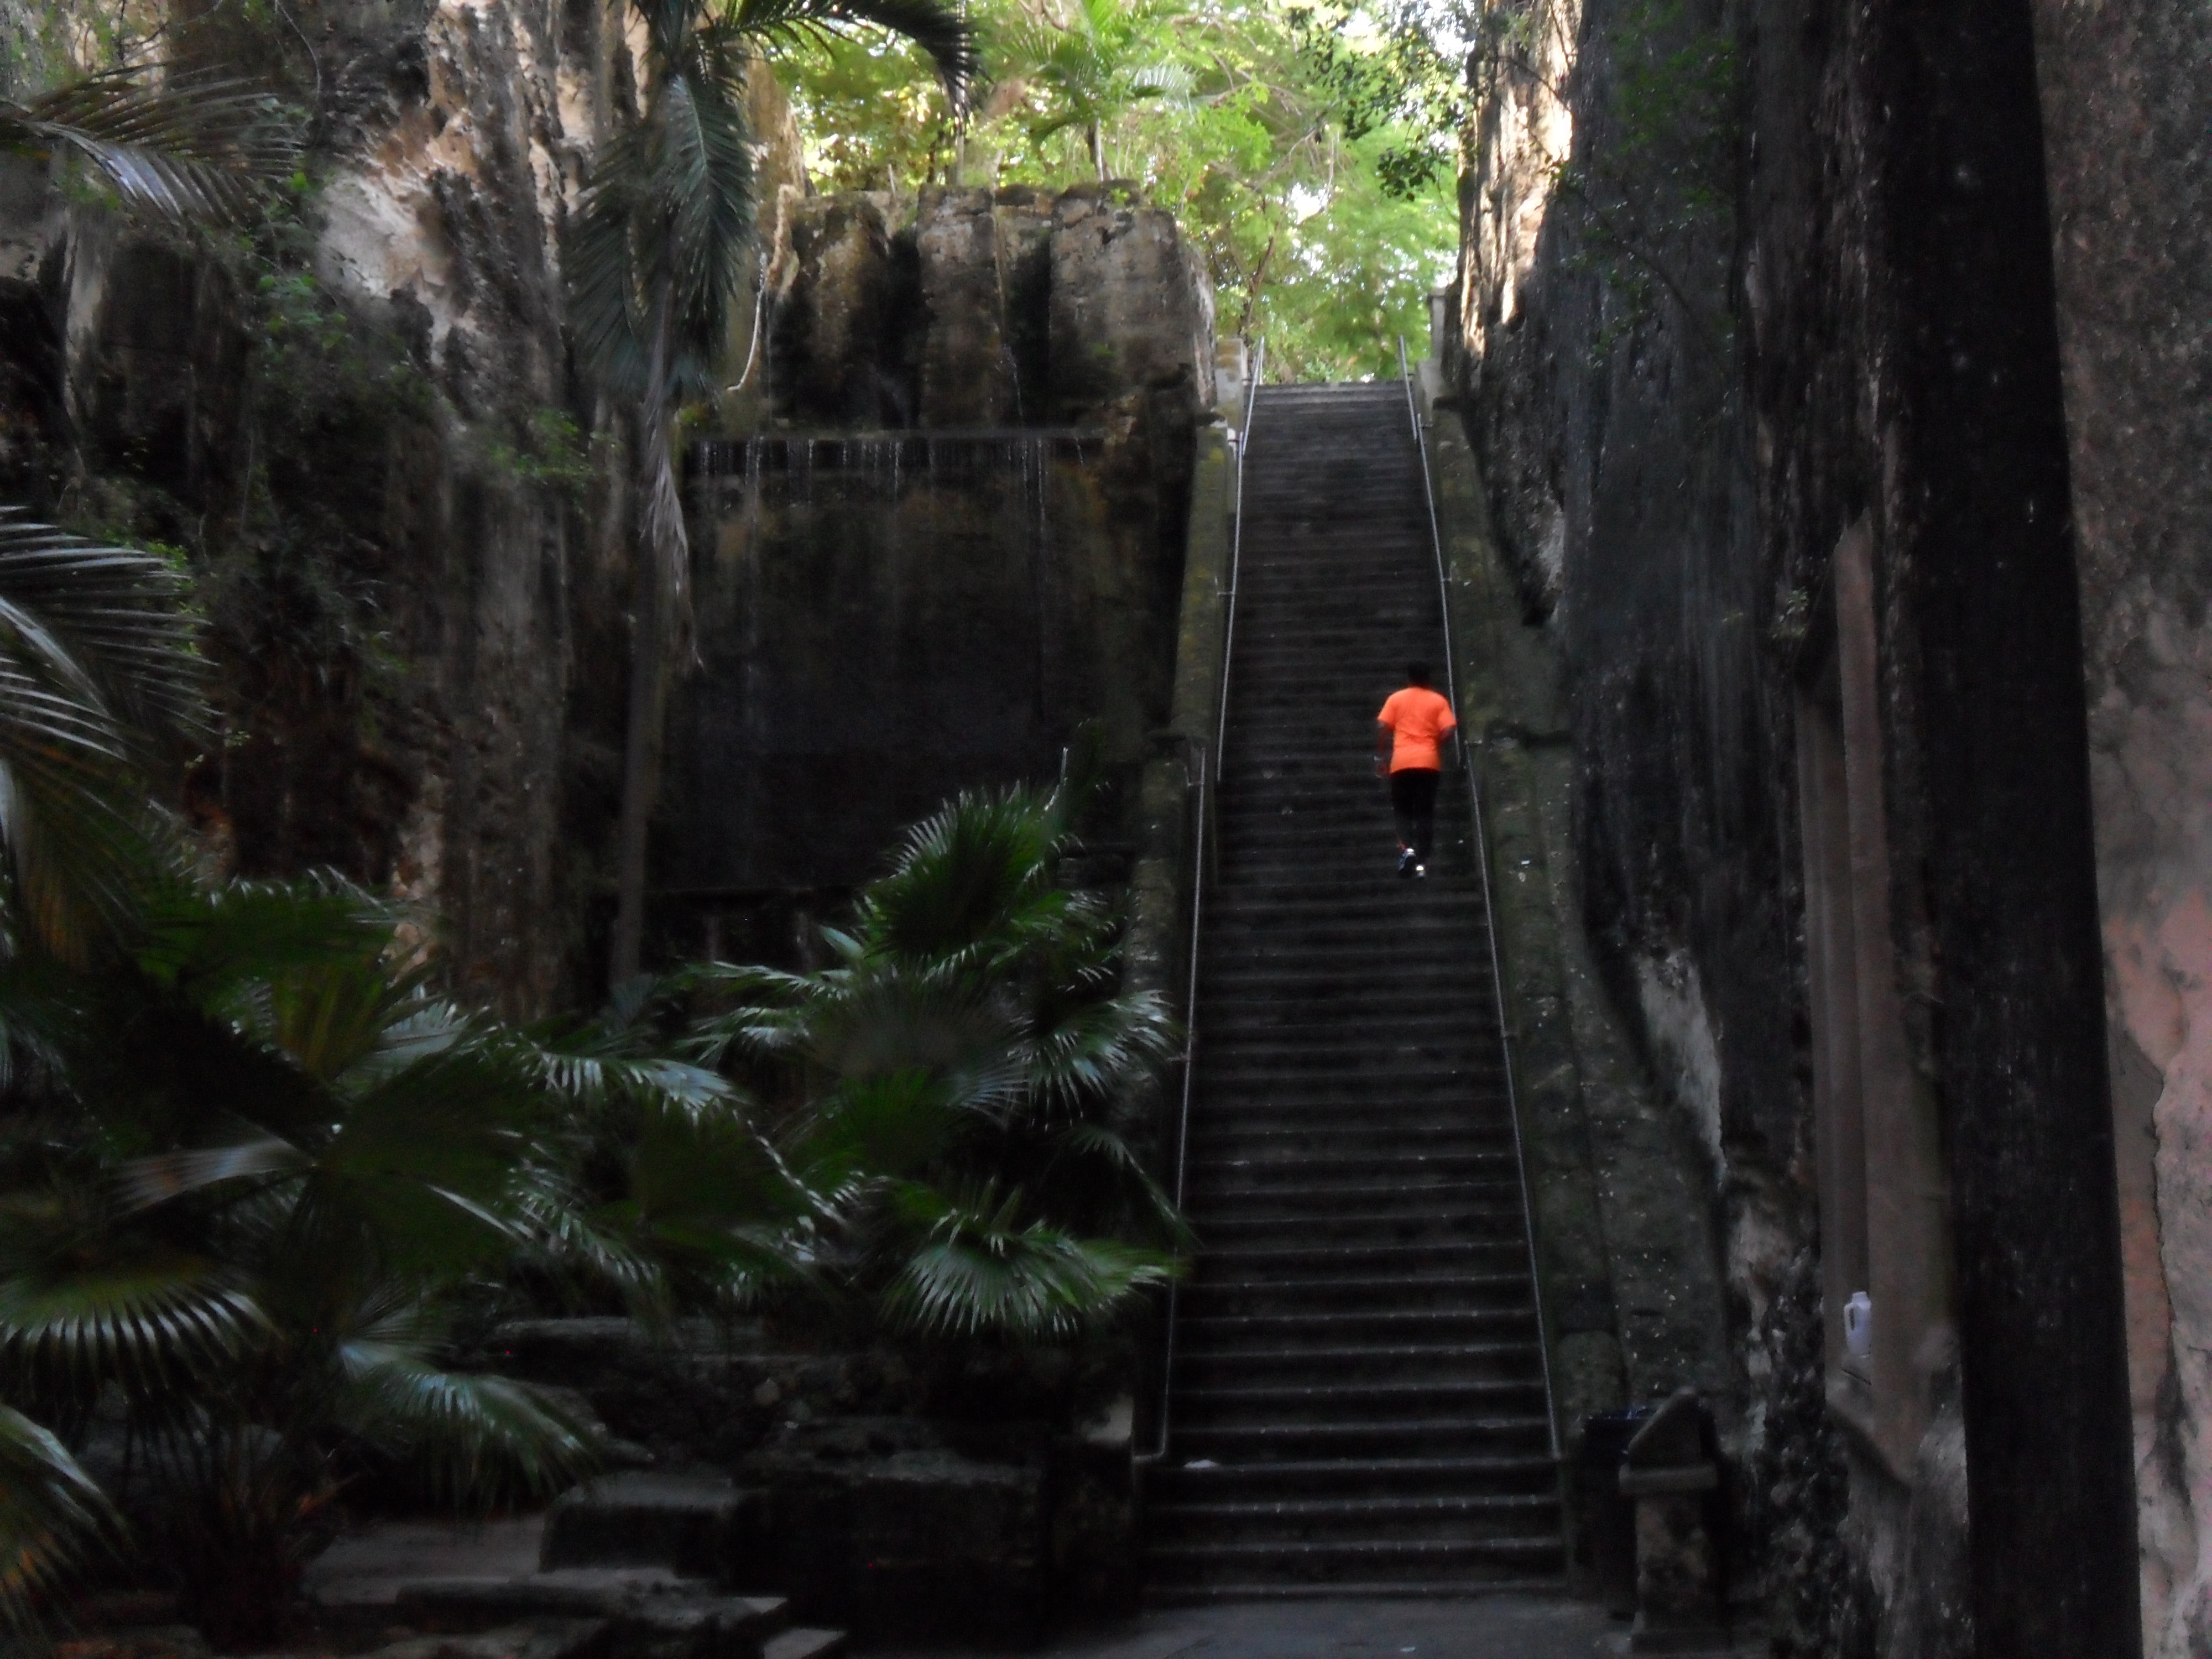 Queen's Staircase in Nassau, The Bahamas | Credit: Flickr user arctic_whirlwind